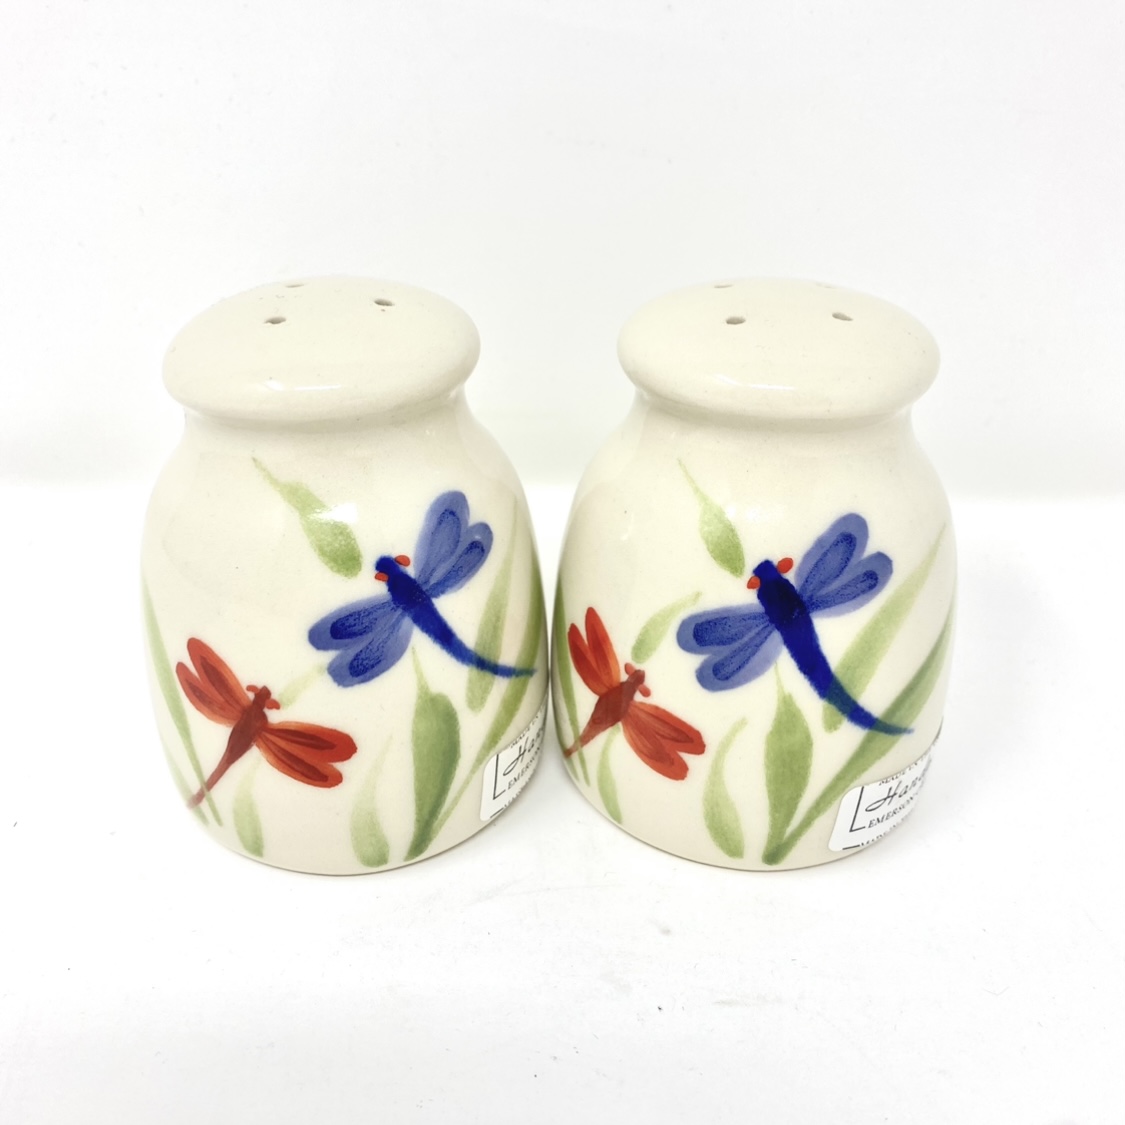 Emerson Creek Pottery Dragonfly Salt and Pepper Shaker Set - Made